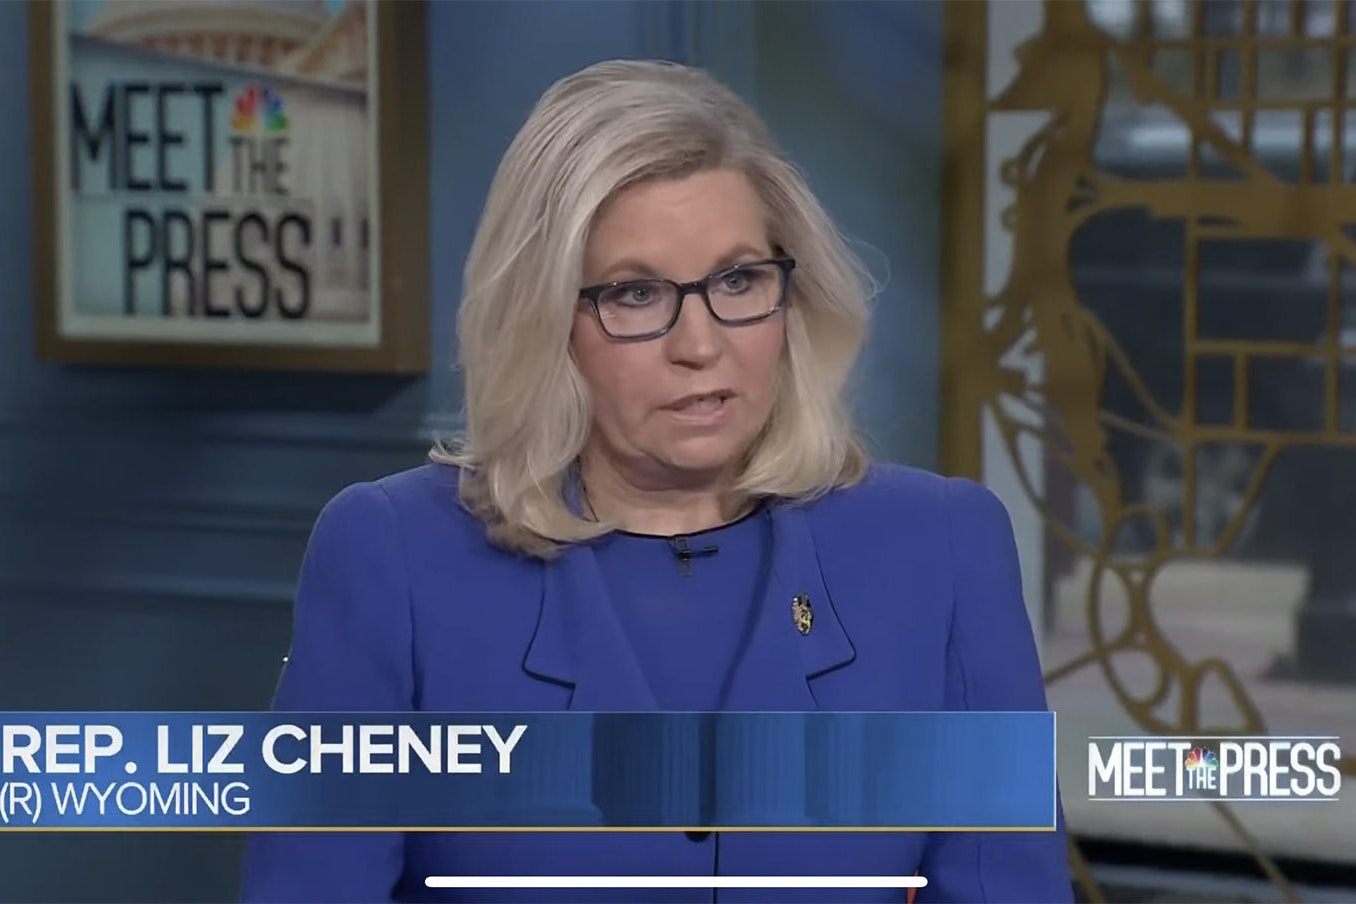 Cheney on Meet the Press 1 10 24 22